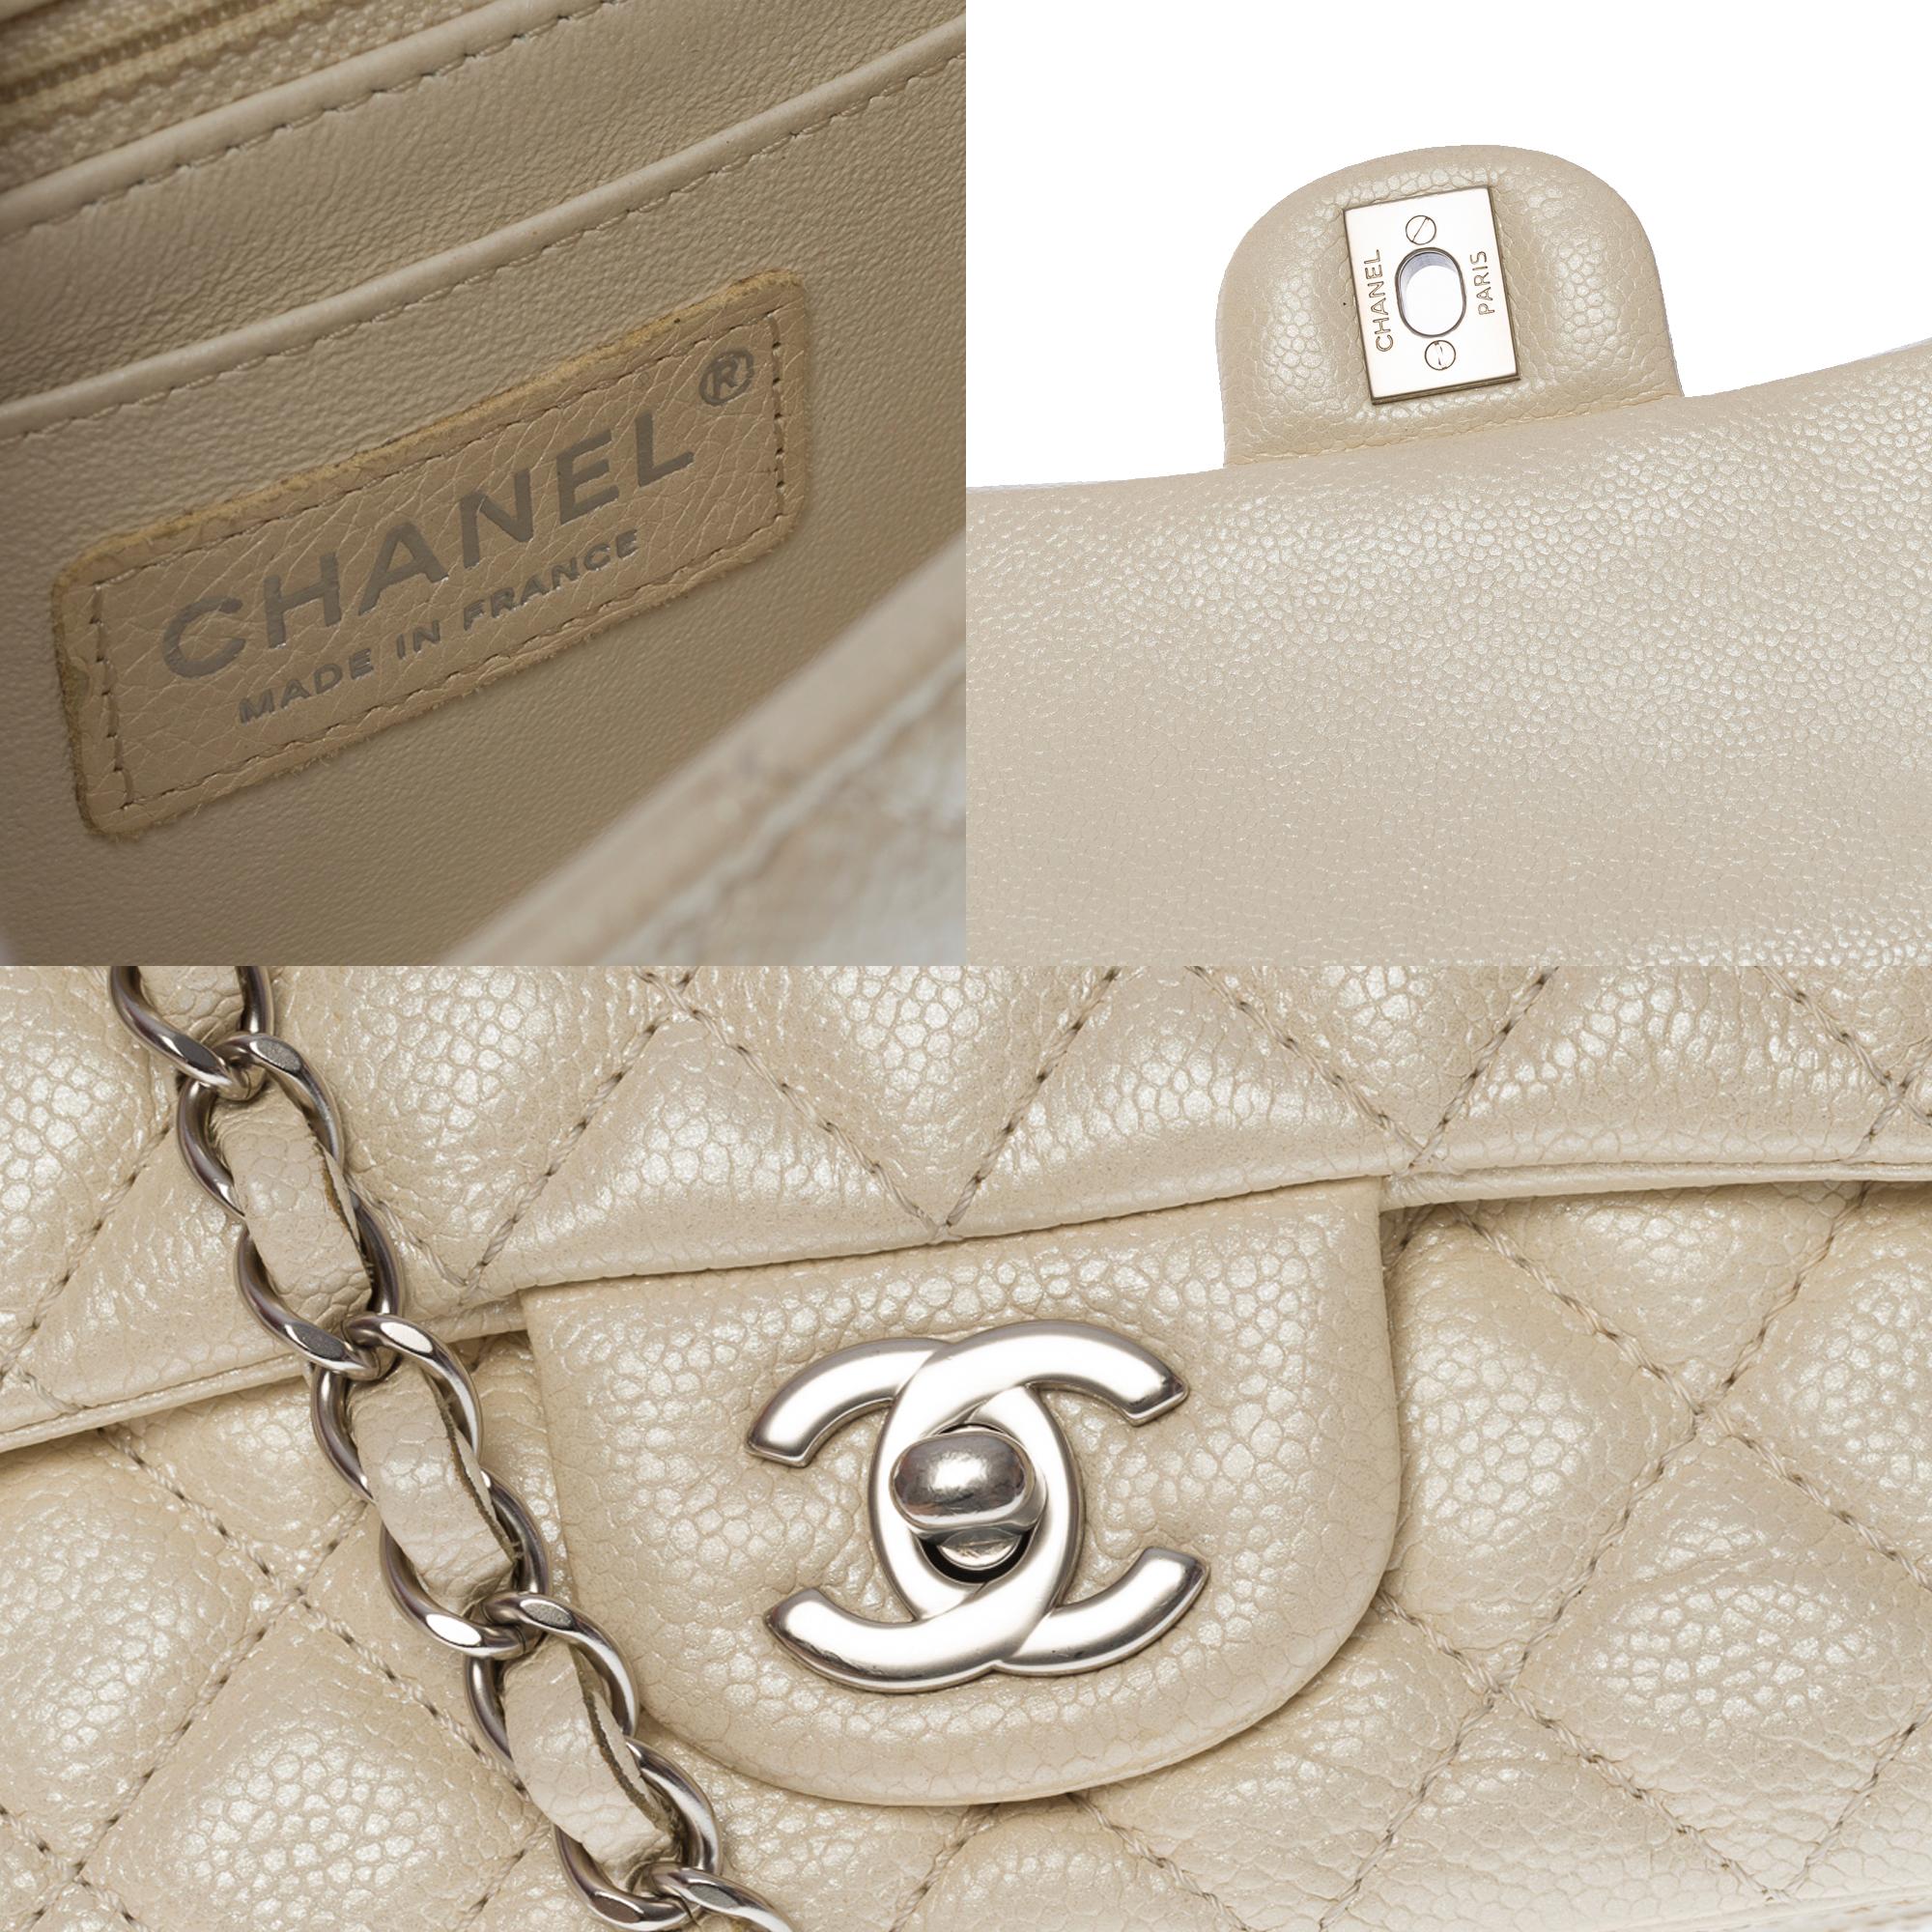 Splendid Chanel Timeless Mini Flap bag in off white pearl quilted leather, SHW For Sale 2